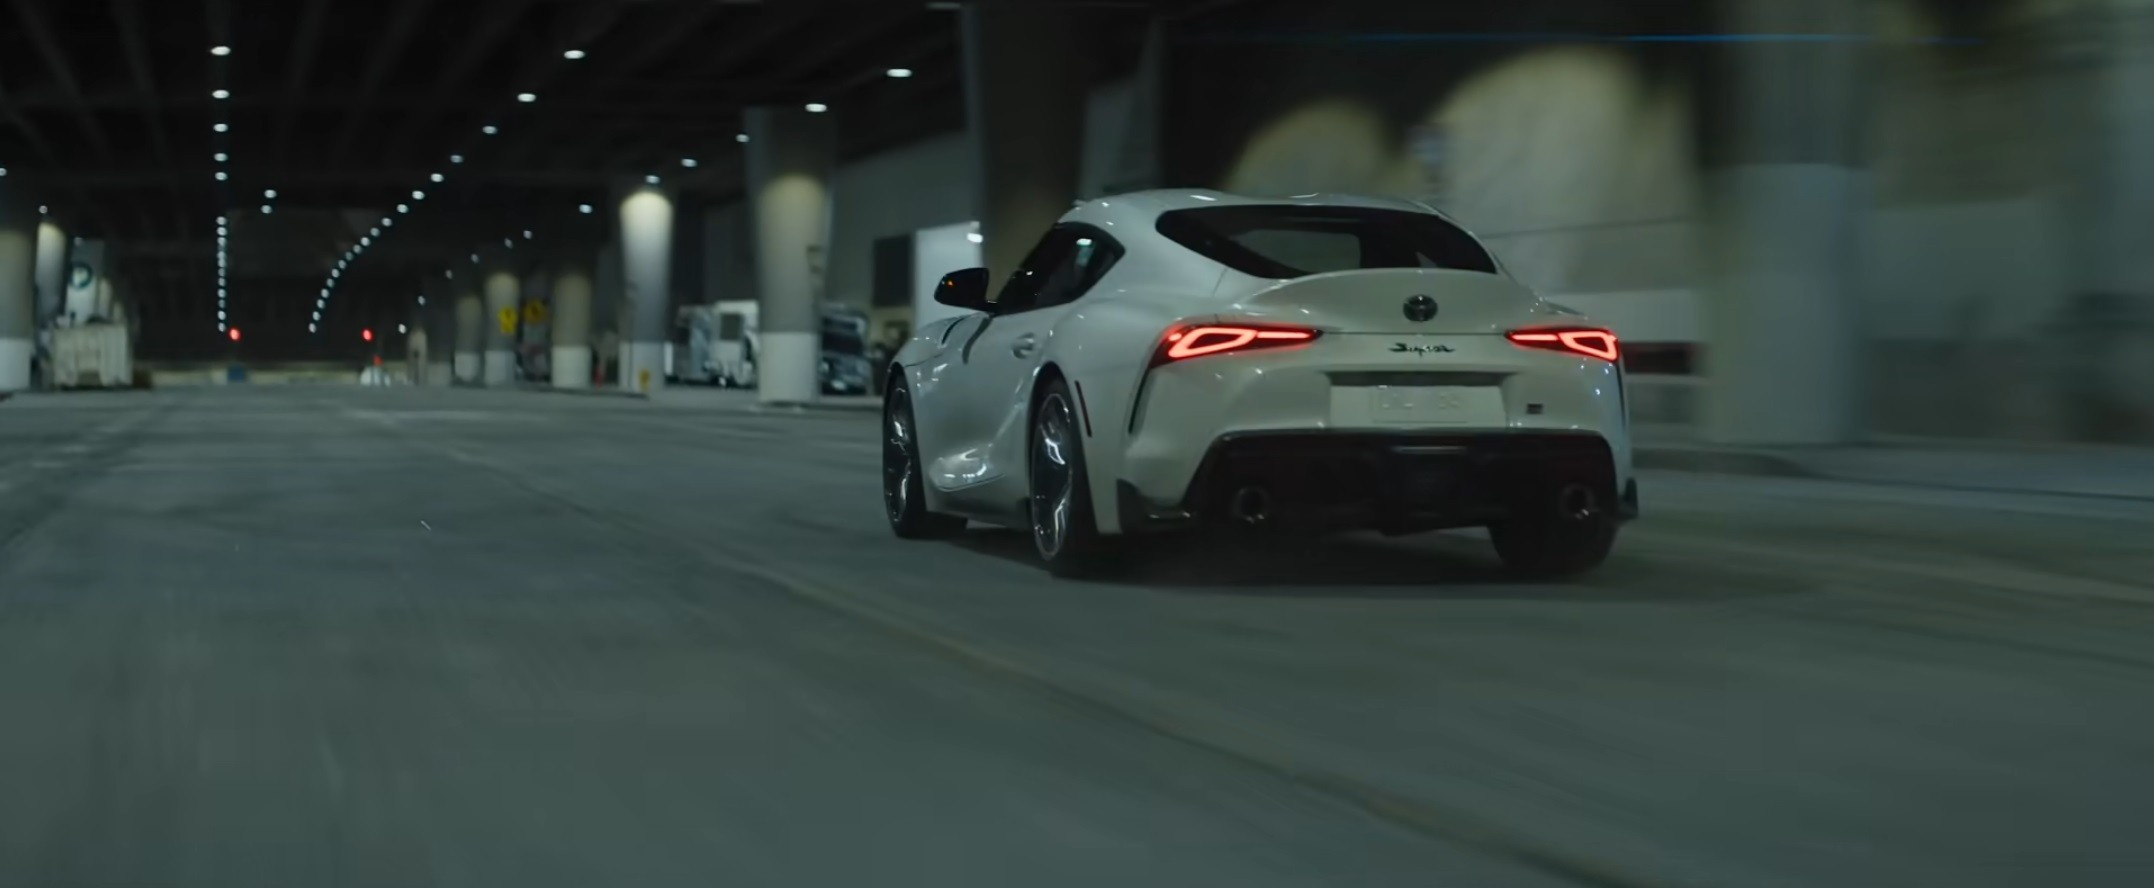 2022 GR Supra U.S. Commercial Is a Tale of Haze and Shopping autoevolution